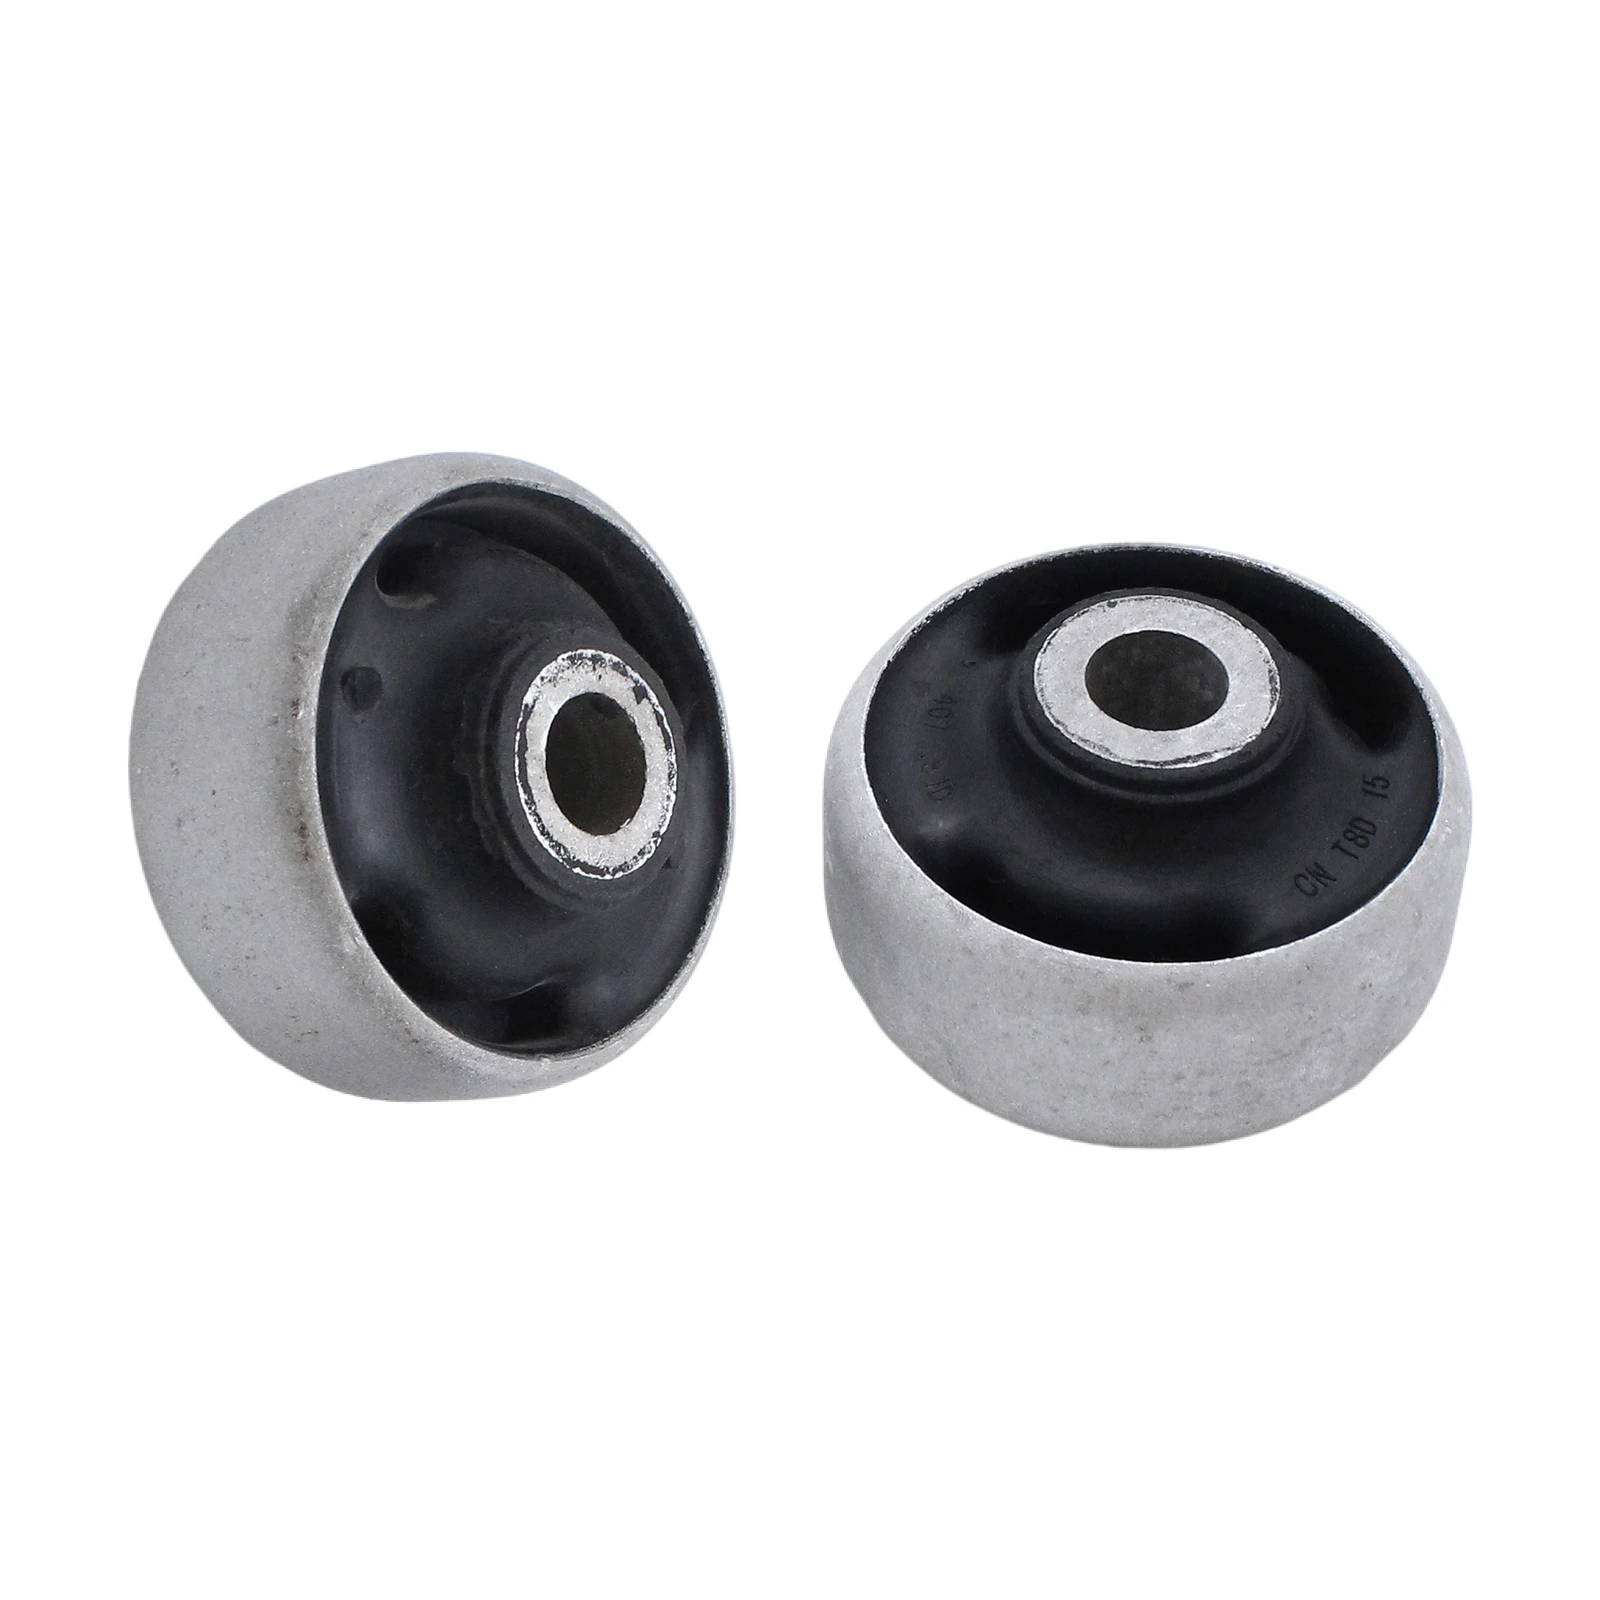 New Control Arm Bushing 2 Pieces 180-407-181 Parts 1J0407181 8N0-407181B Forward Position Front Rear Axle Rubber  